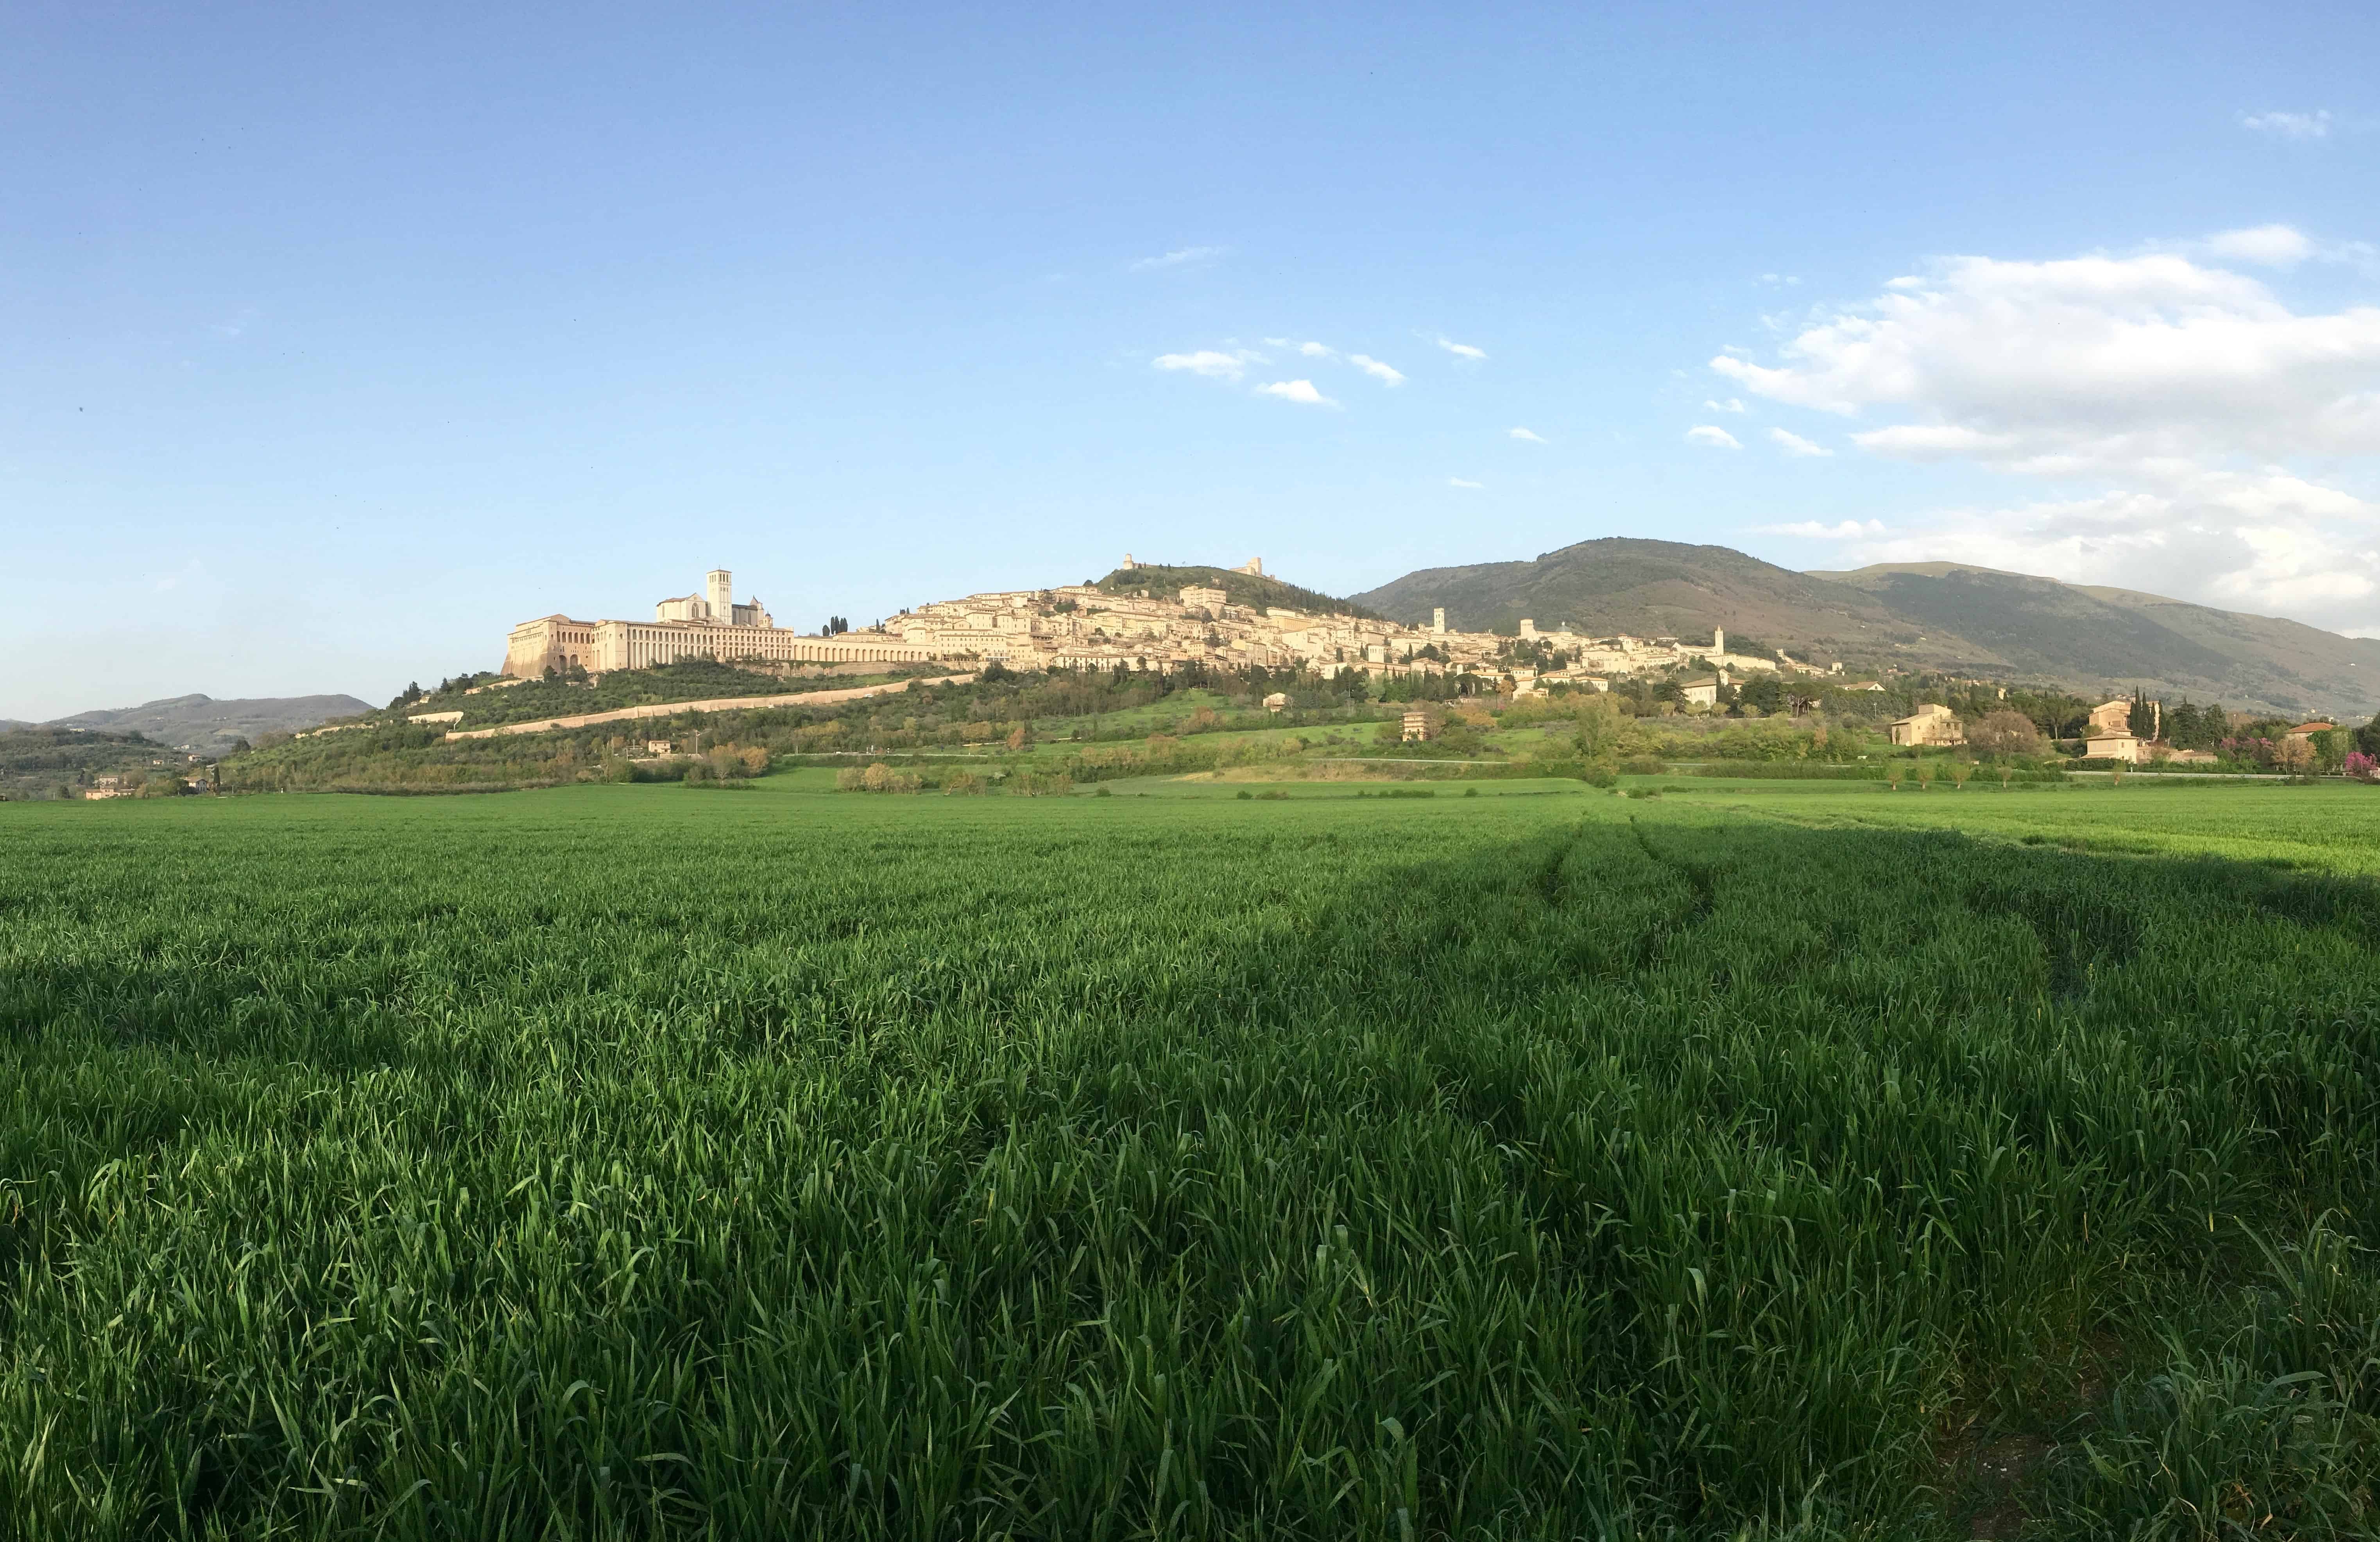 View of Assisi from the valley below.